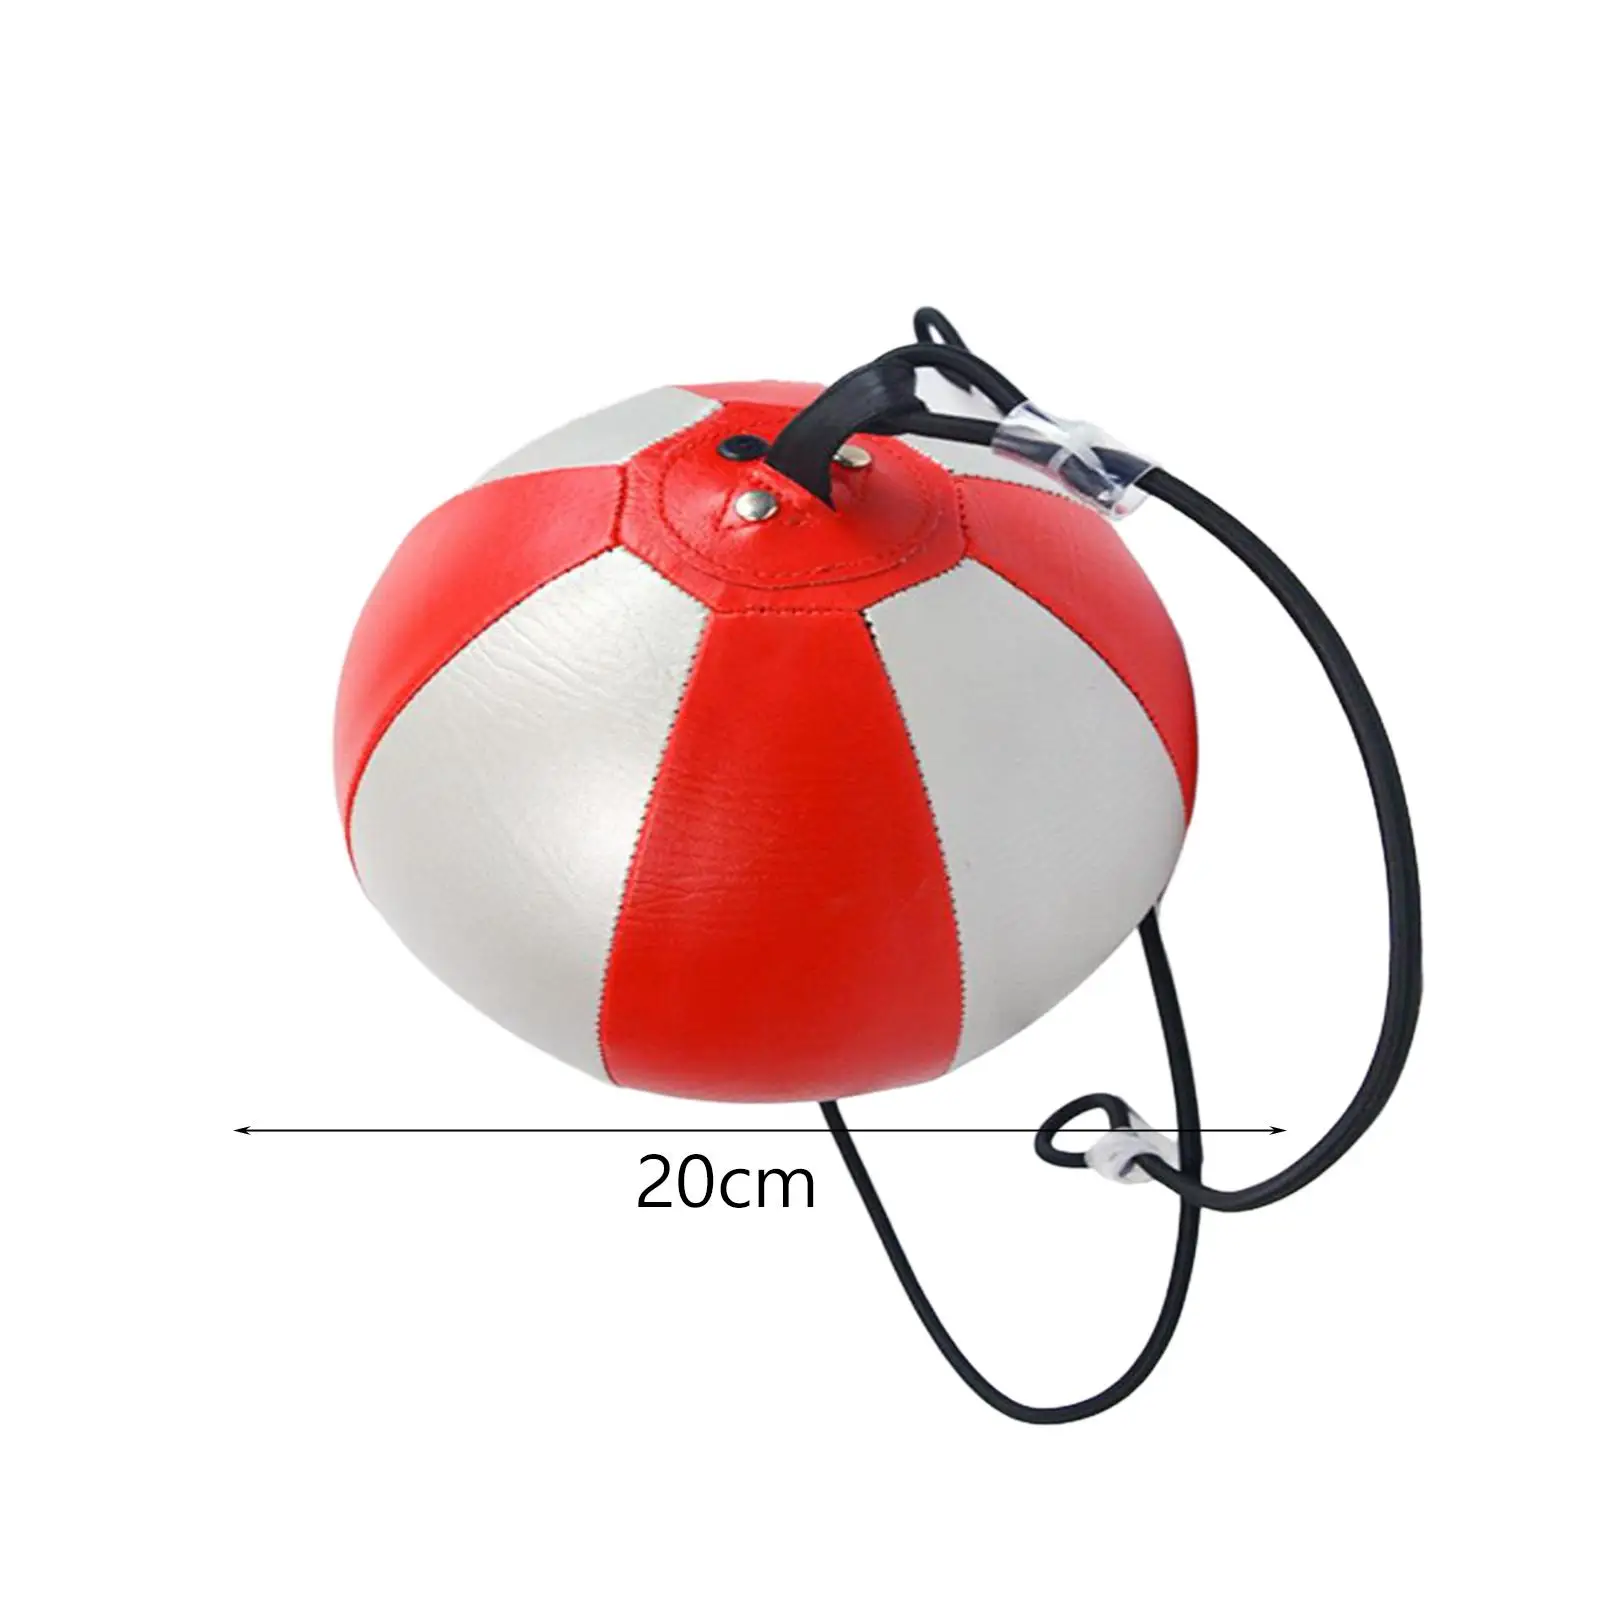 Boxing Speed Ball Fitness Equipment Premium Double End Bag Reaction Target for MMA Home Gym Punch Exercise Kickboxing Workout